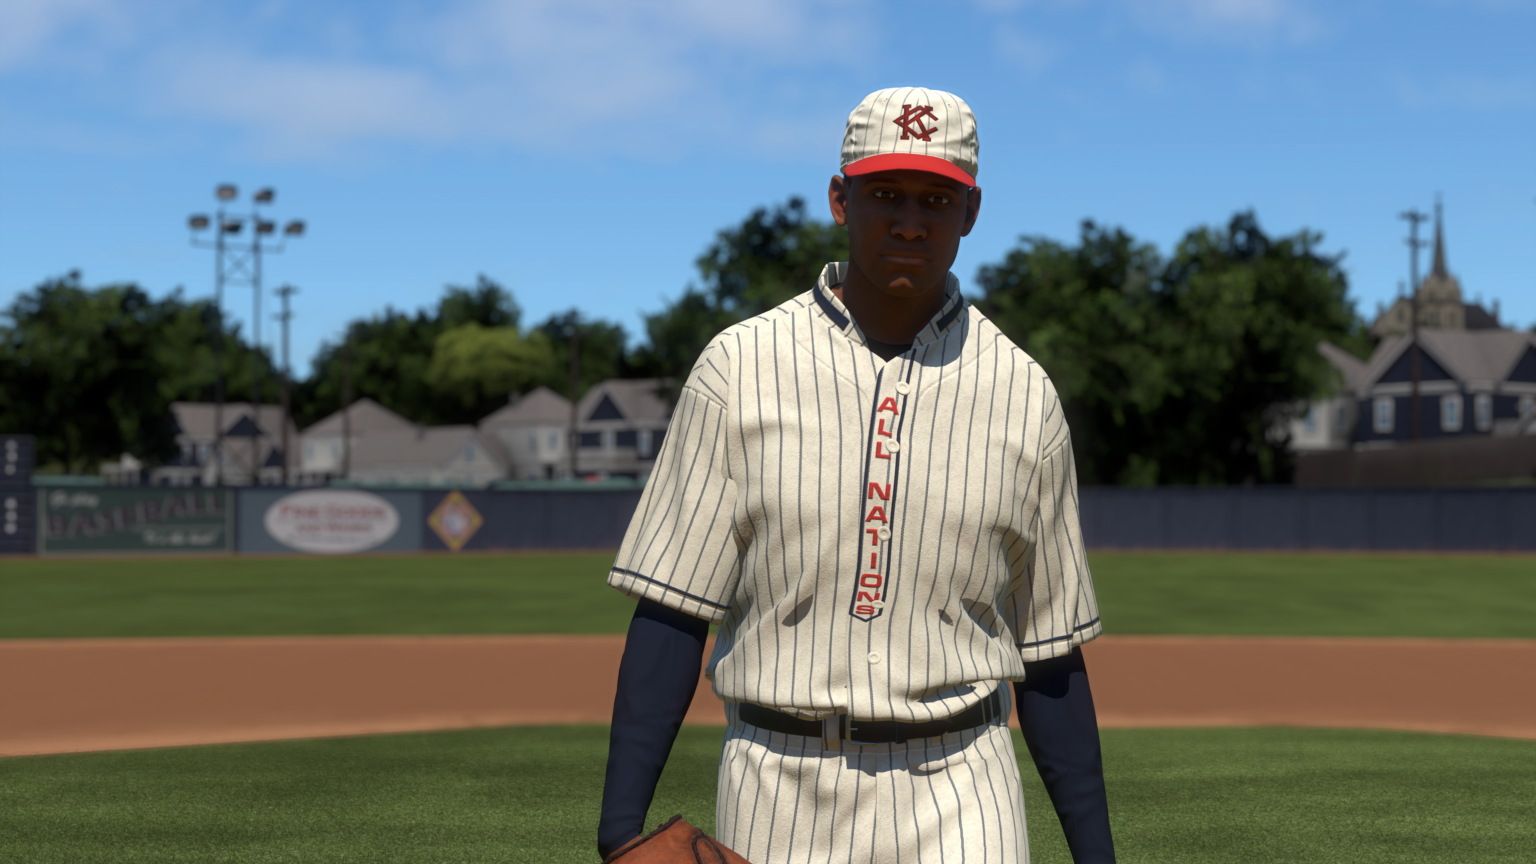 MLB The Show 23 spotlights the history of the Negro Leagues for a